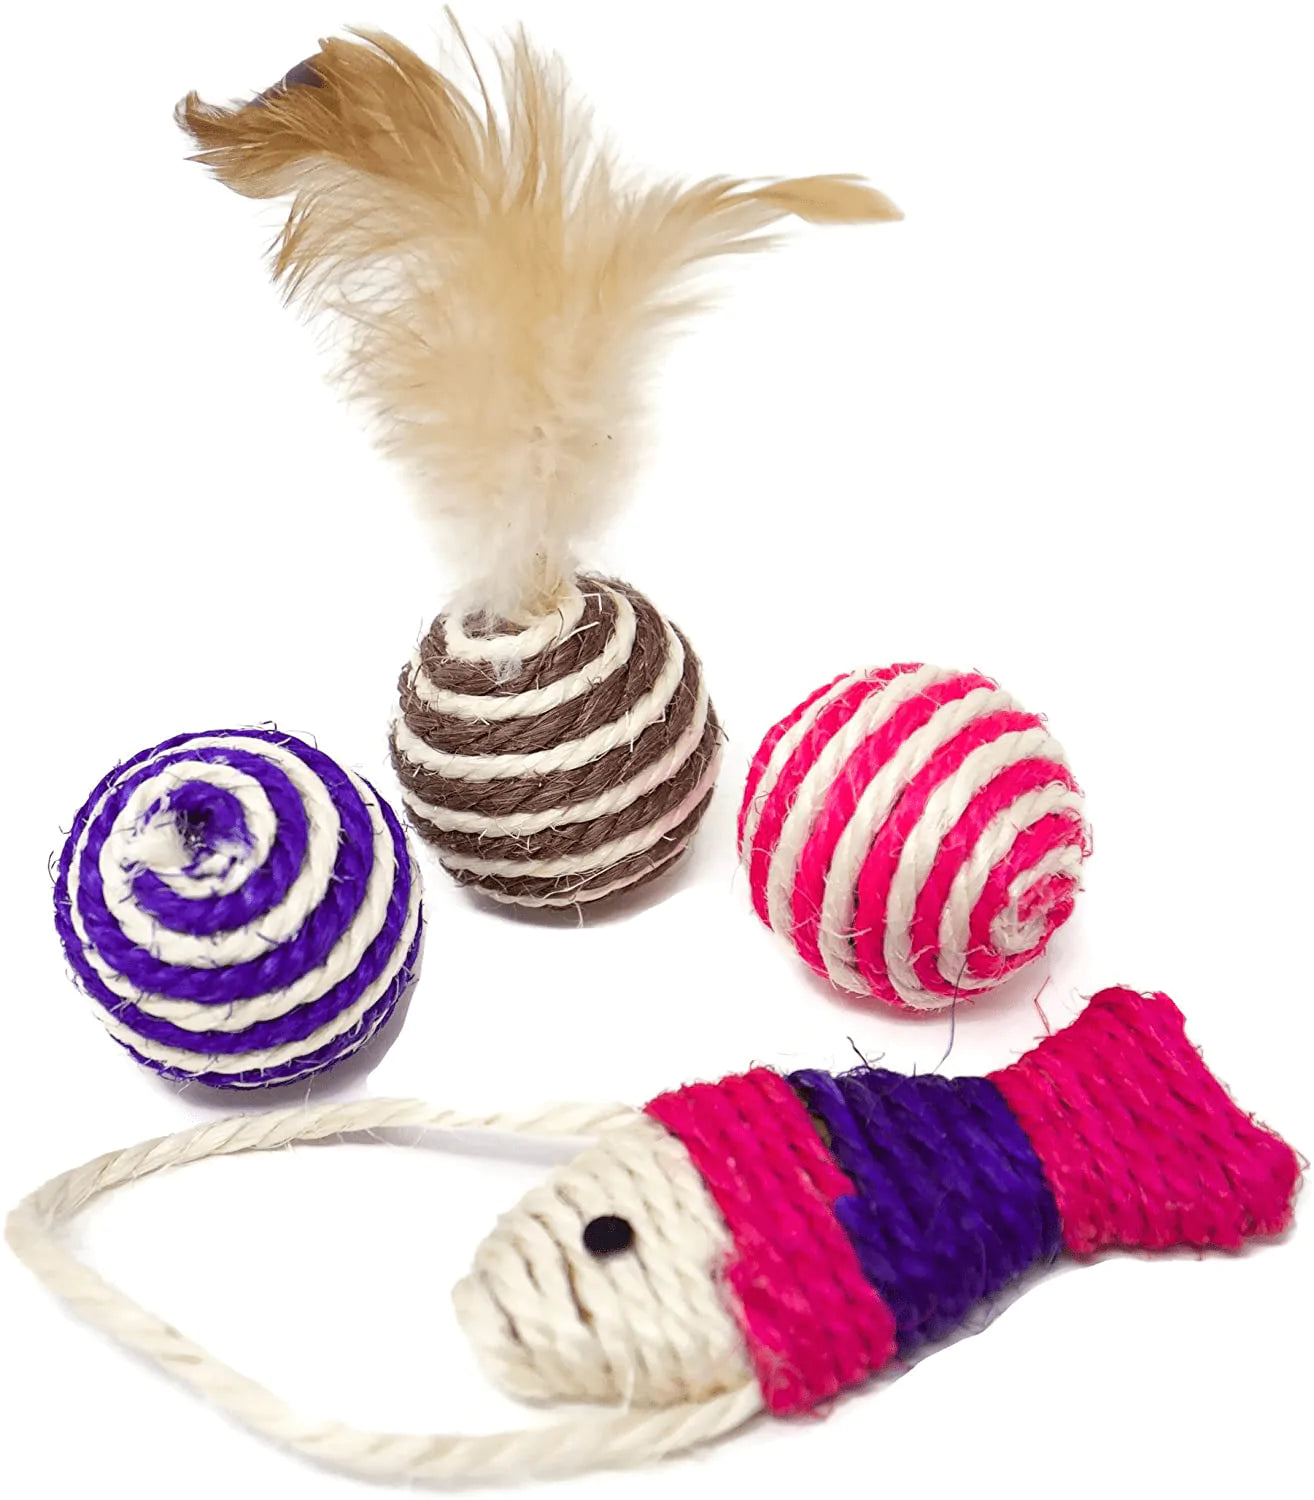 Youngever 24 Cat Toys Kitten Toys Assortments, Tunnel, Interactive Cat Teaser, Fluffy Mouse, Crinkle Balls for Cat, Kitty, Kitten Animals & Pet Supplies > Pet Supplies > Cat Supplies > Cat Toys Youngever LLC   